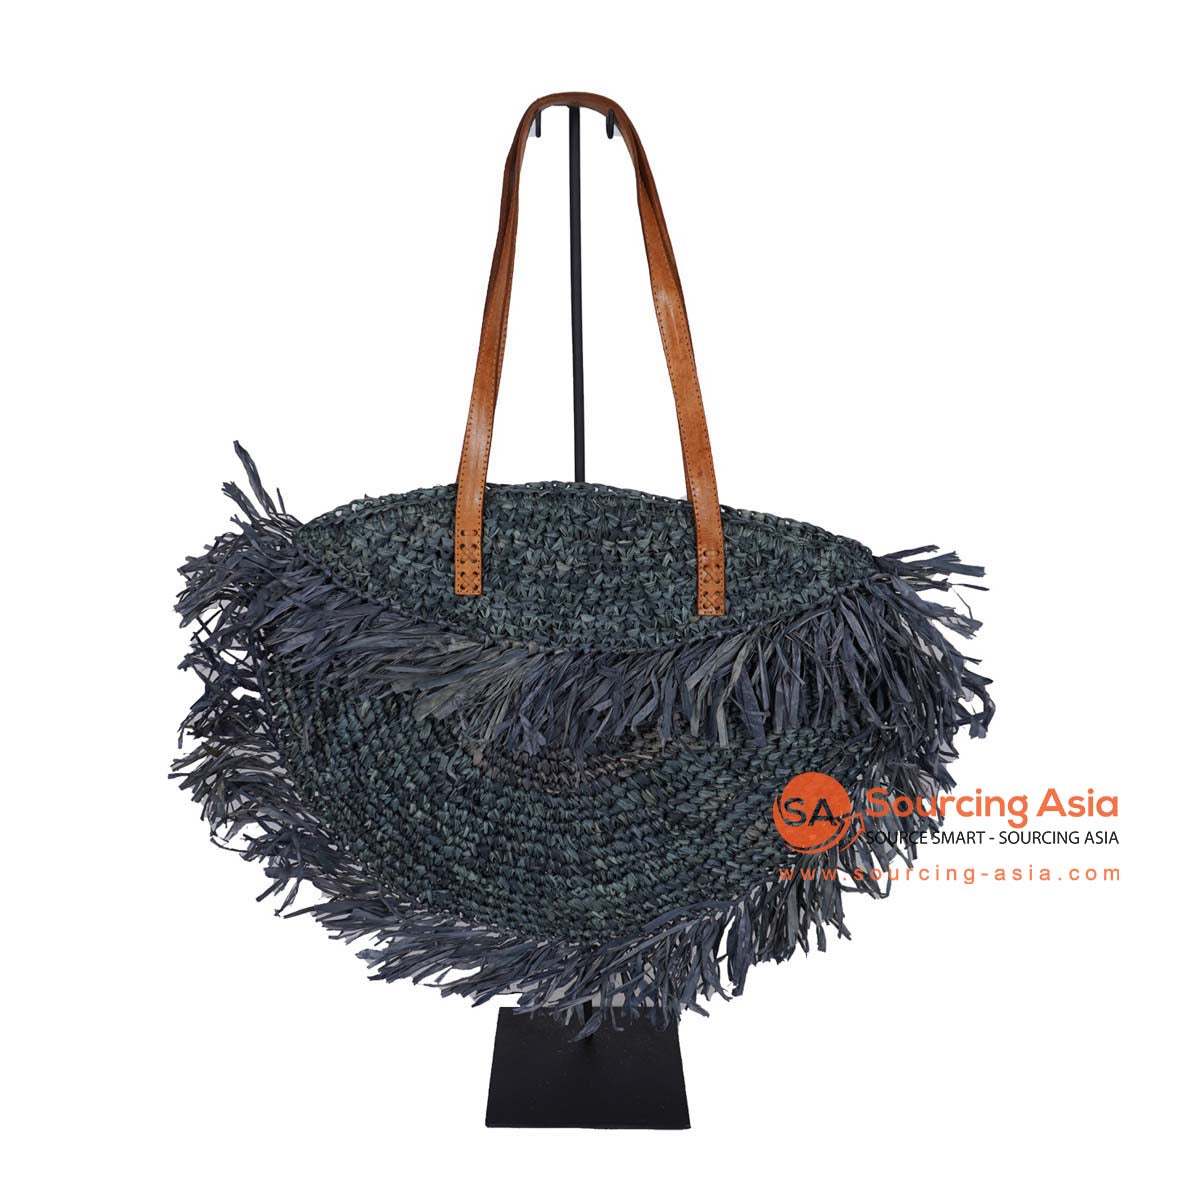 HBSC286-1 BLACK GAJIH BAG WITH FRINGE AND LEATHER HANDLE